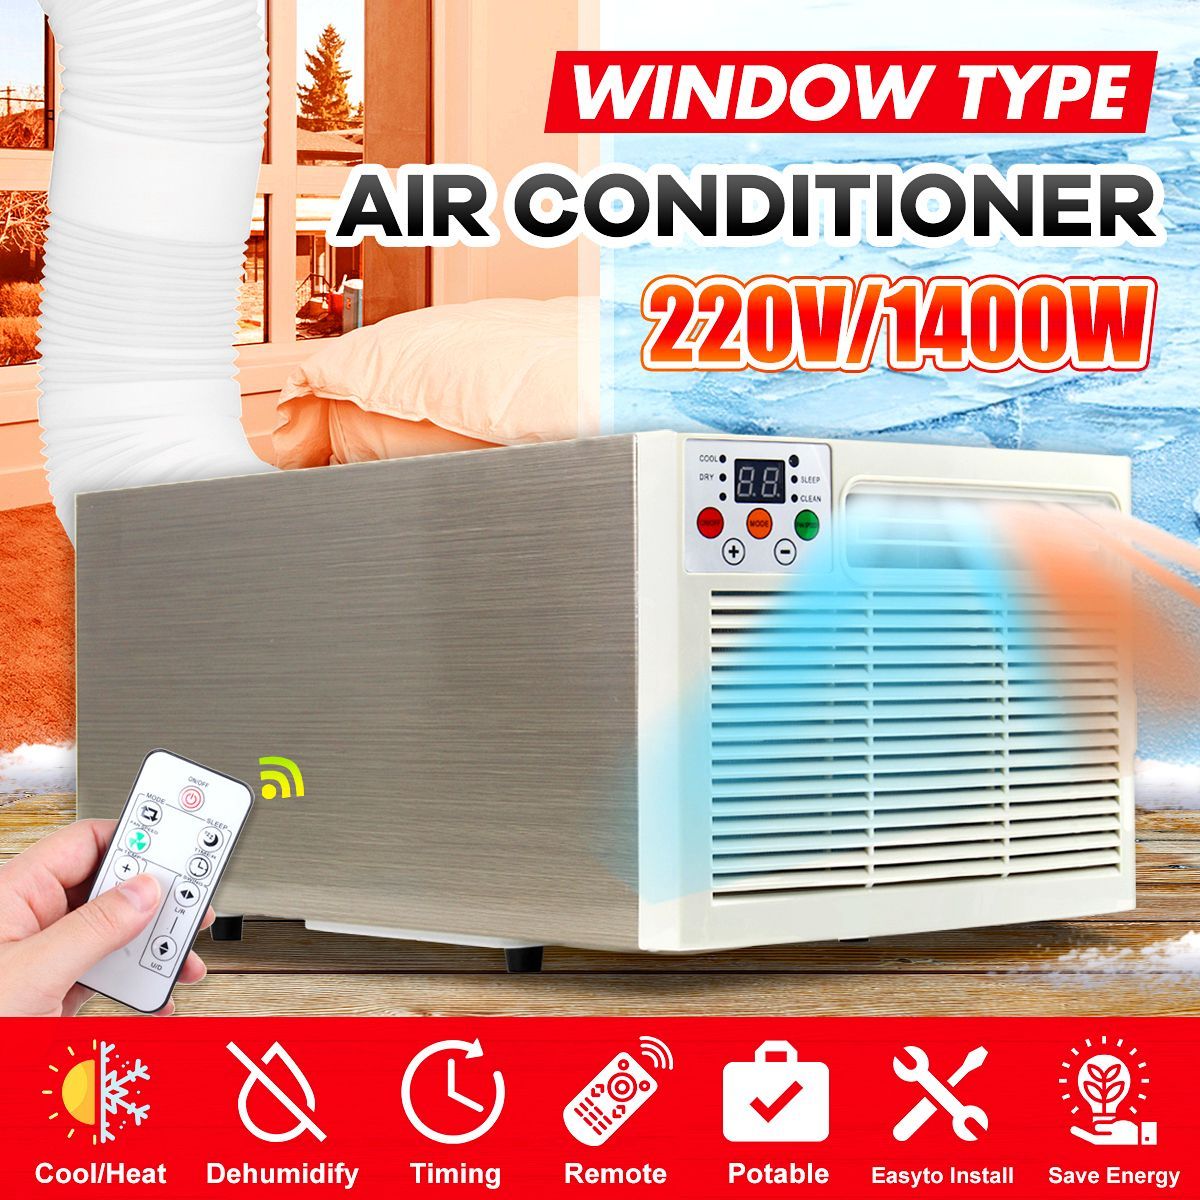 220x558x295mm-220V-Portable-Heater-Air-Conditioner-Window-Air-Conditioner-Multi-functional-Cooling-H-1559939